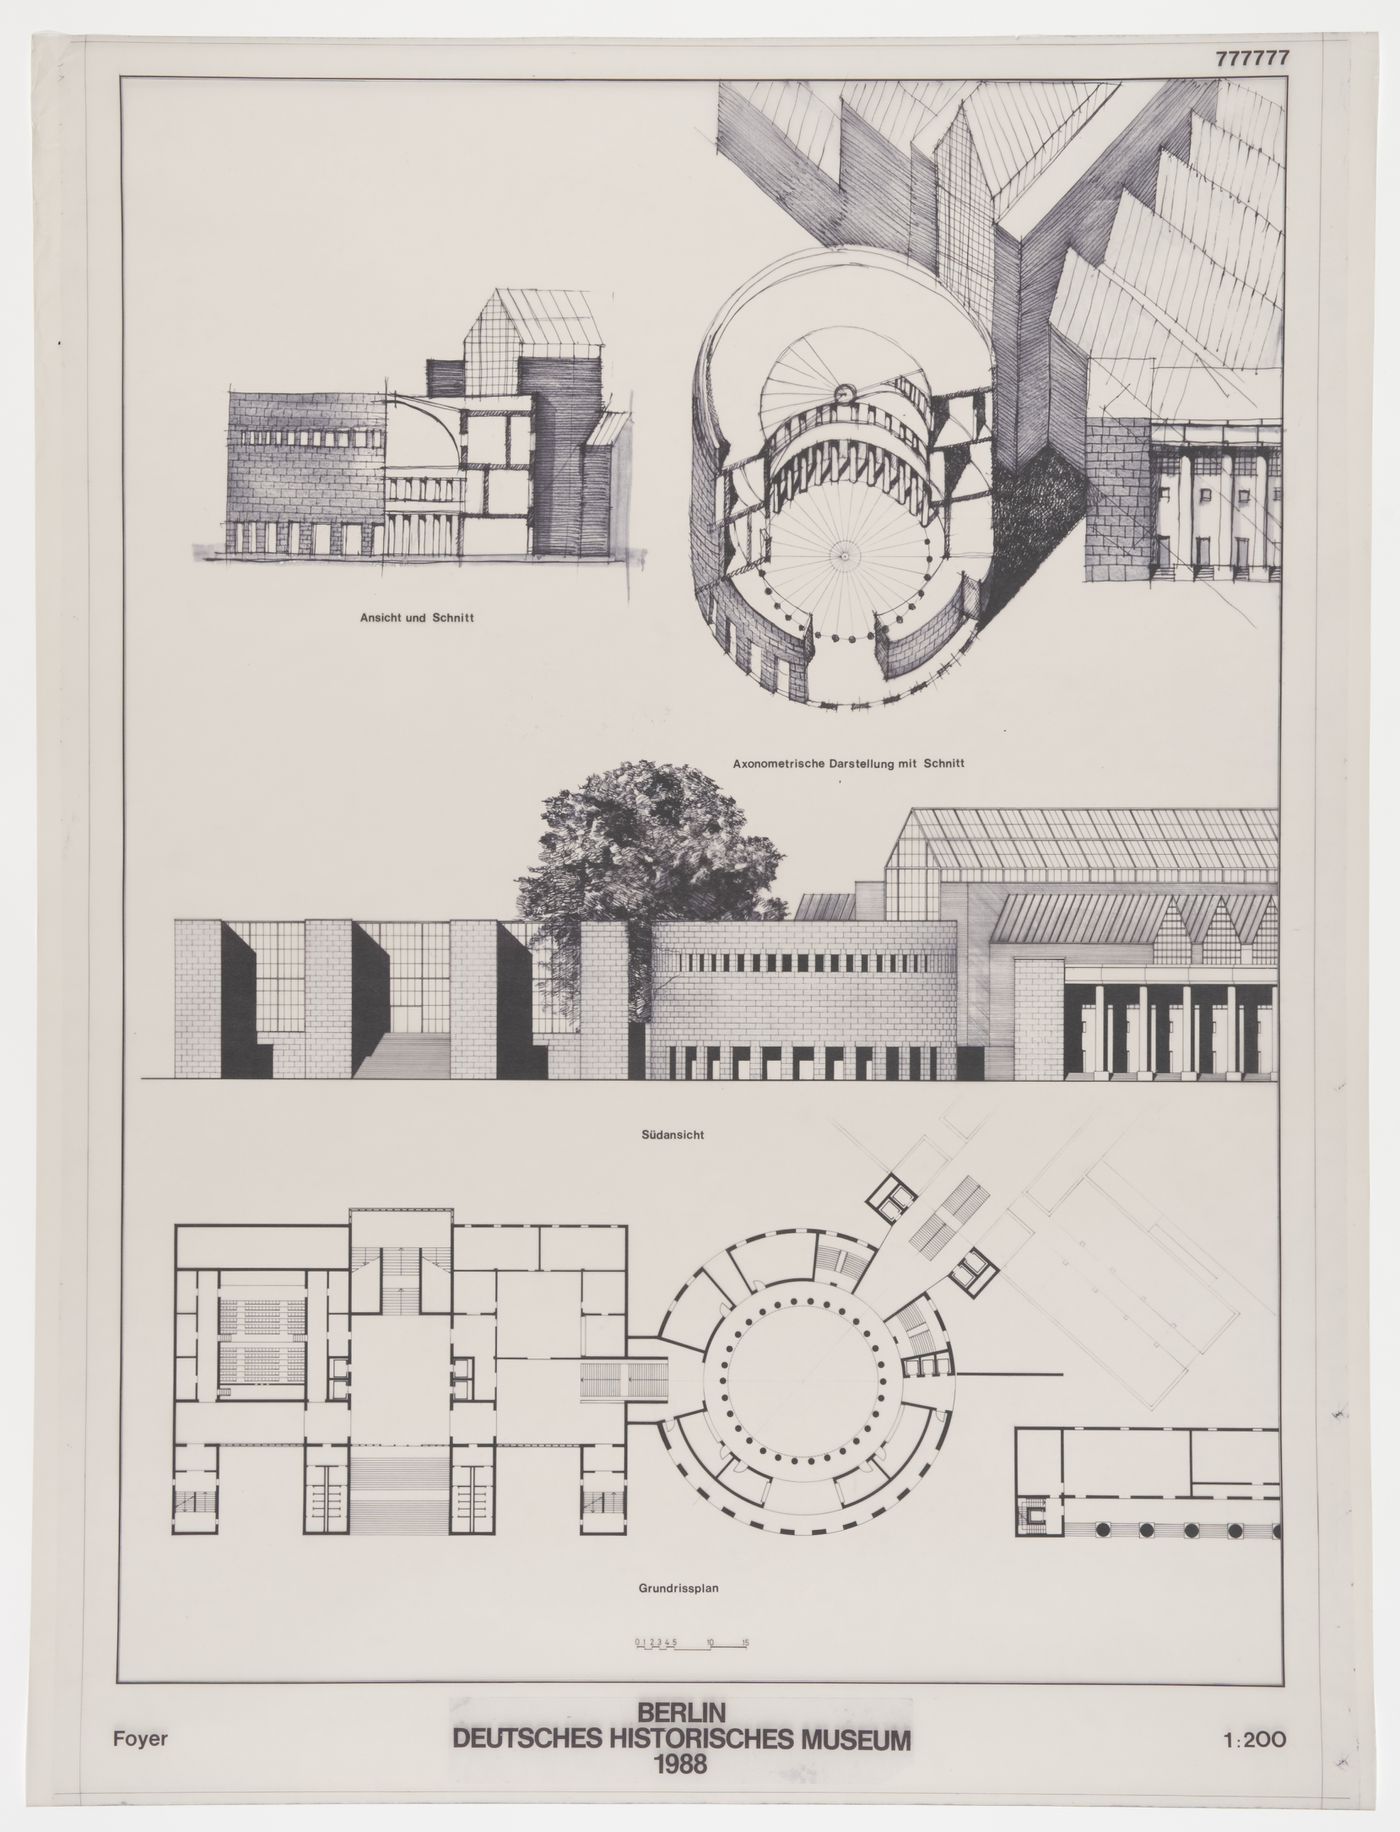 Deutsches Historisches Museum, Berlin, Germany: cut-away view, axonometric, elevation and floor plan for the foyer